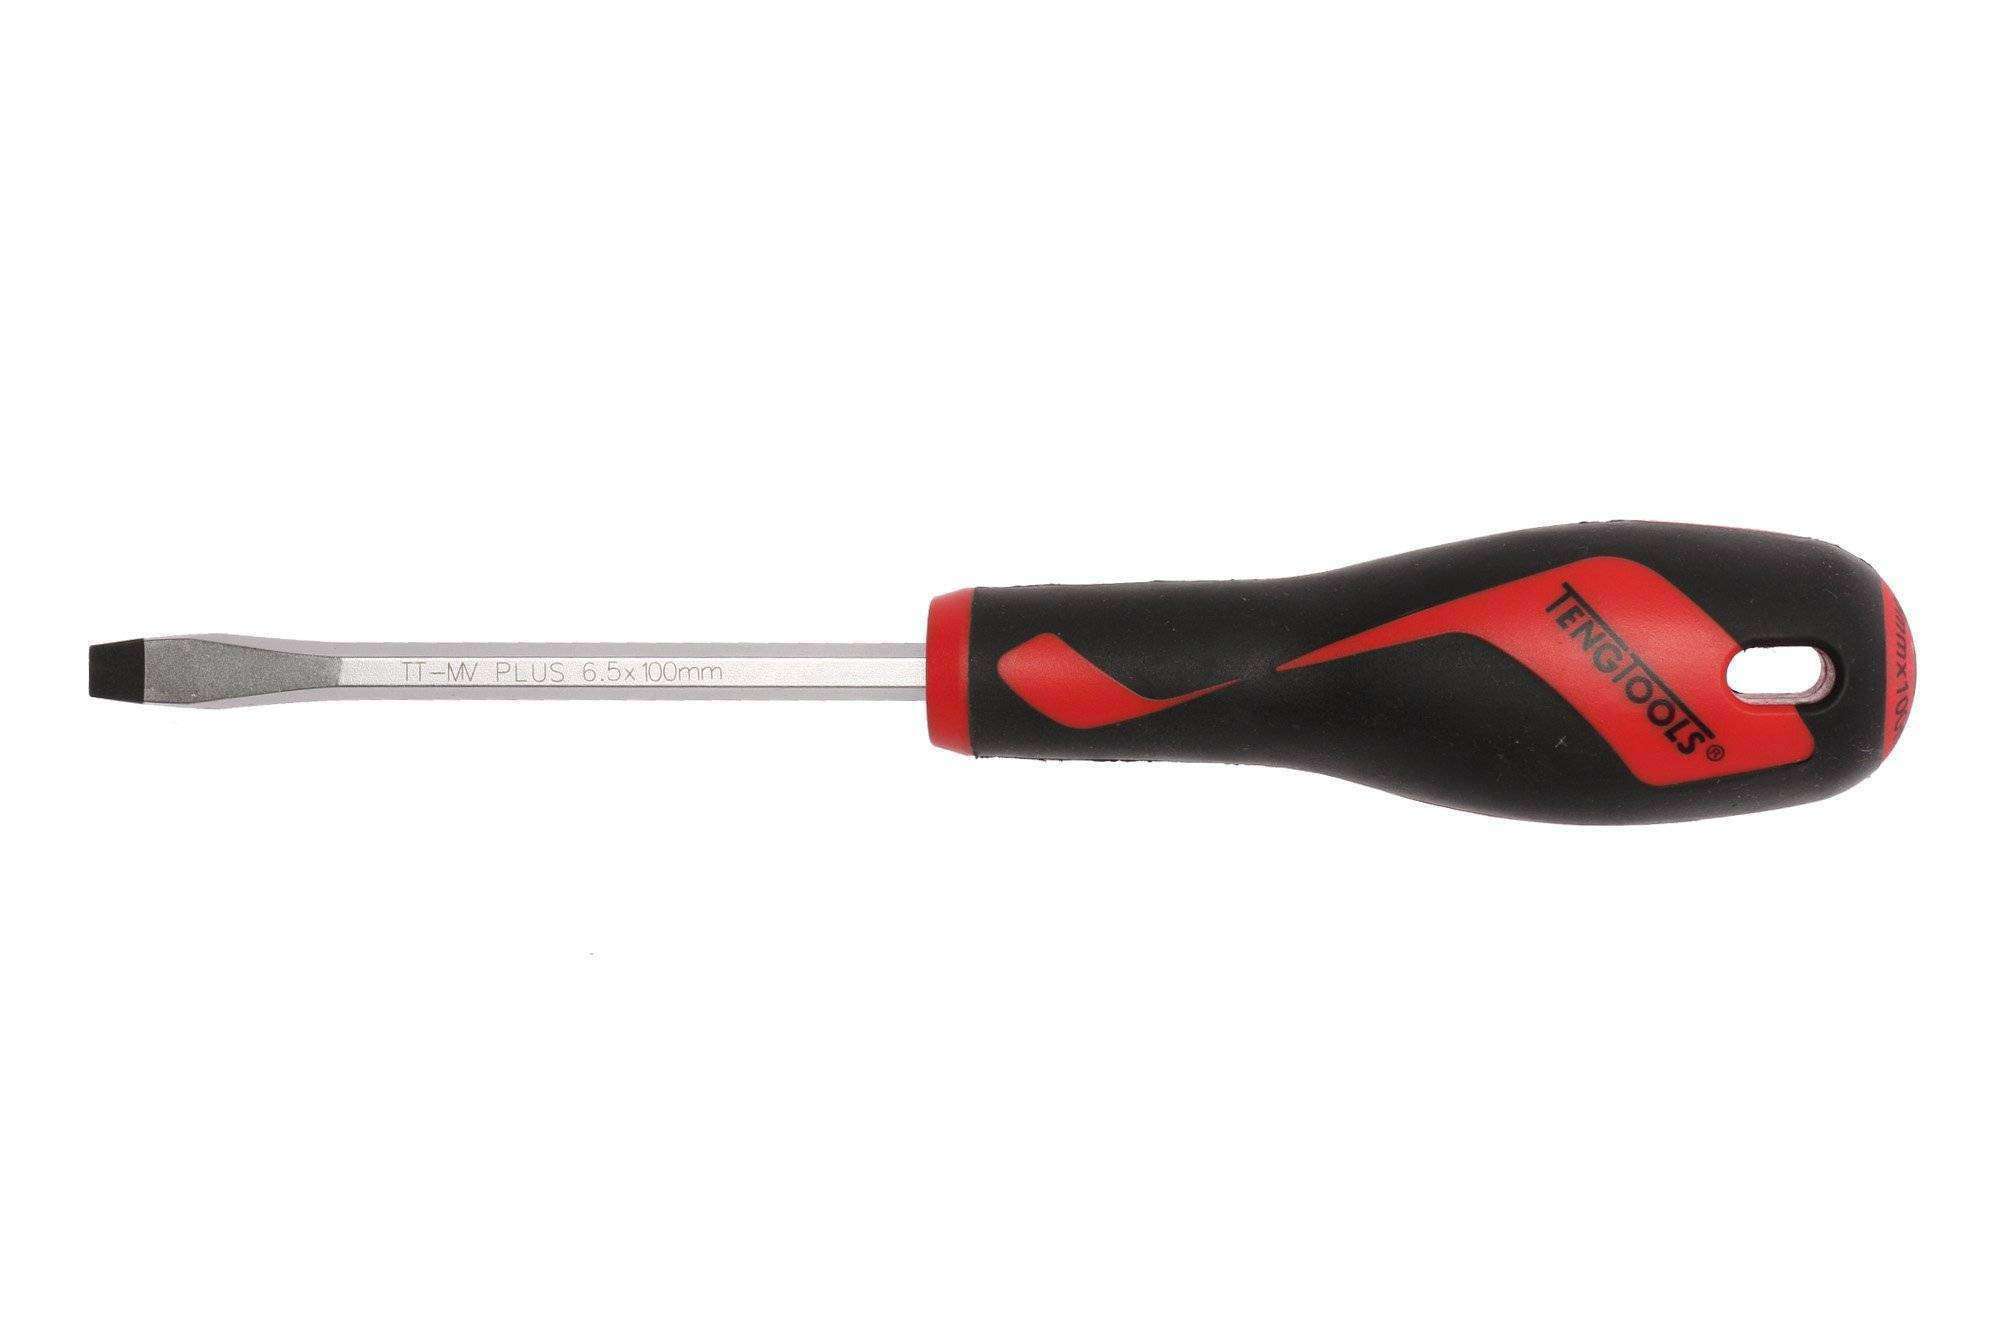 Teng Tools 6.5mm / 1/4 Inch x 100mm / 3.9 Inch Long Flat Type Slotted Head Screwdriver - MD932N